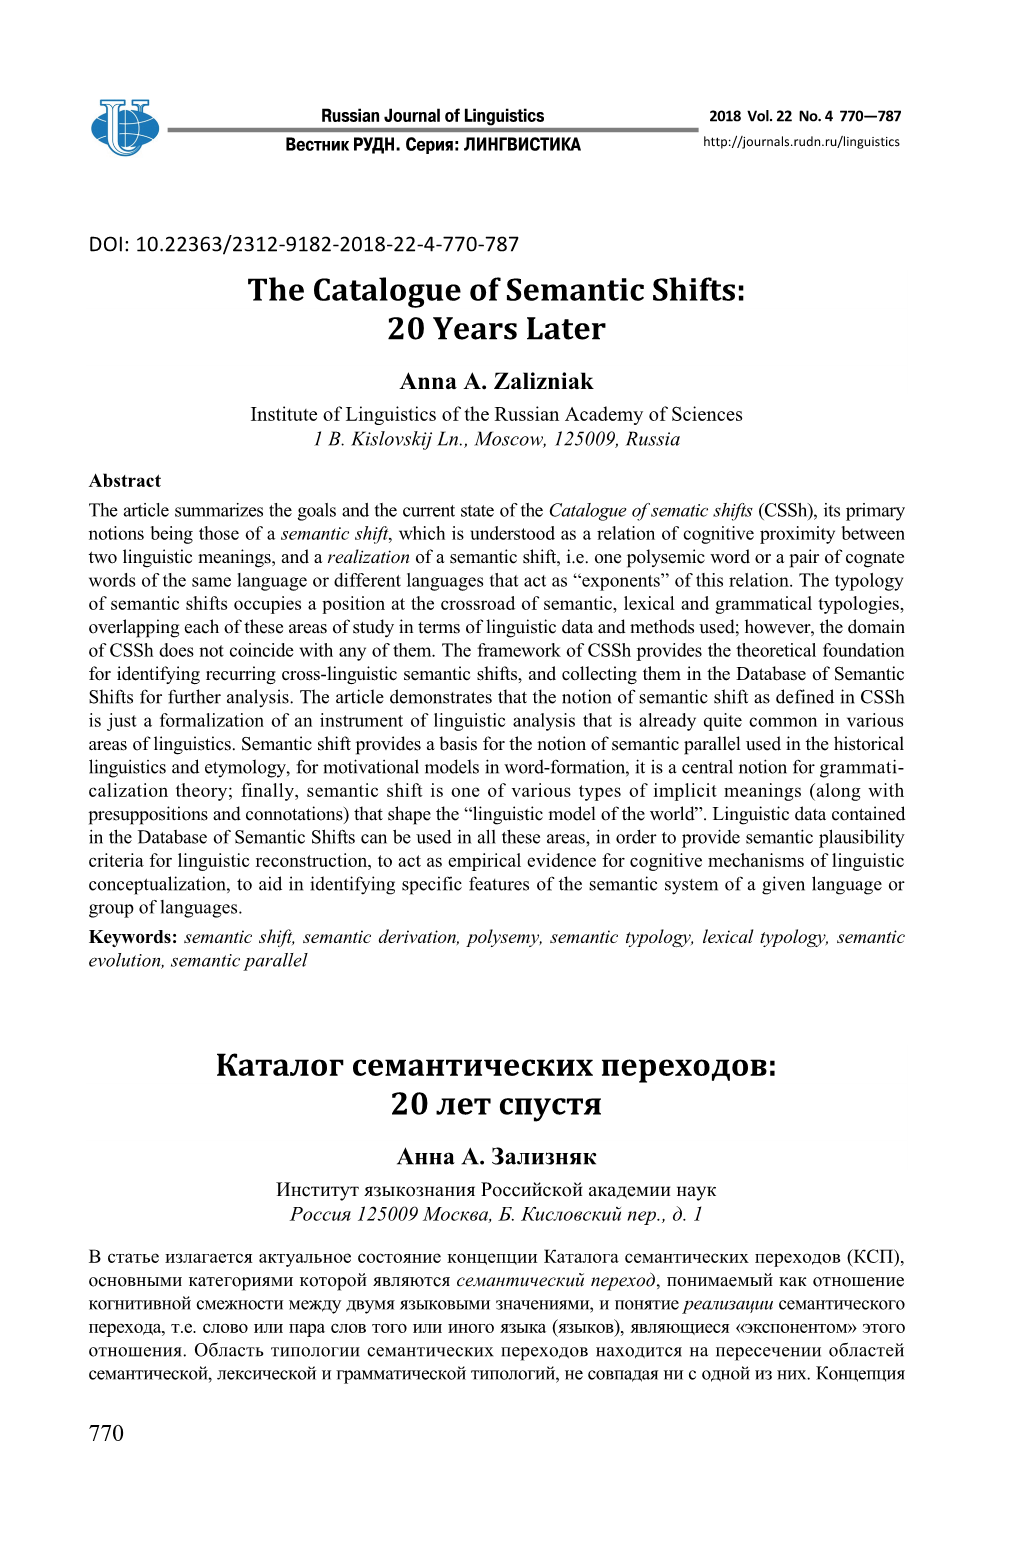 The Catalogue of Semantic Shifts: 20 Years Later Anna A